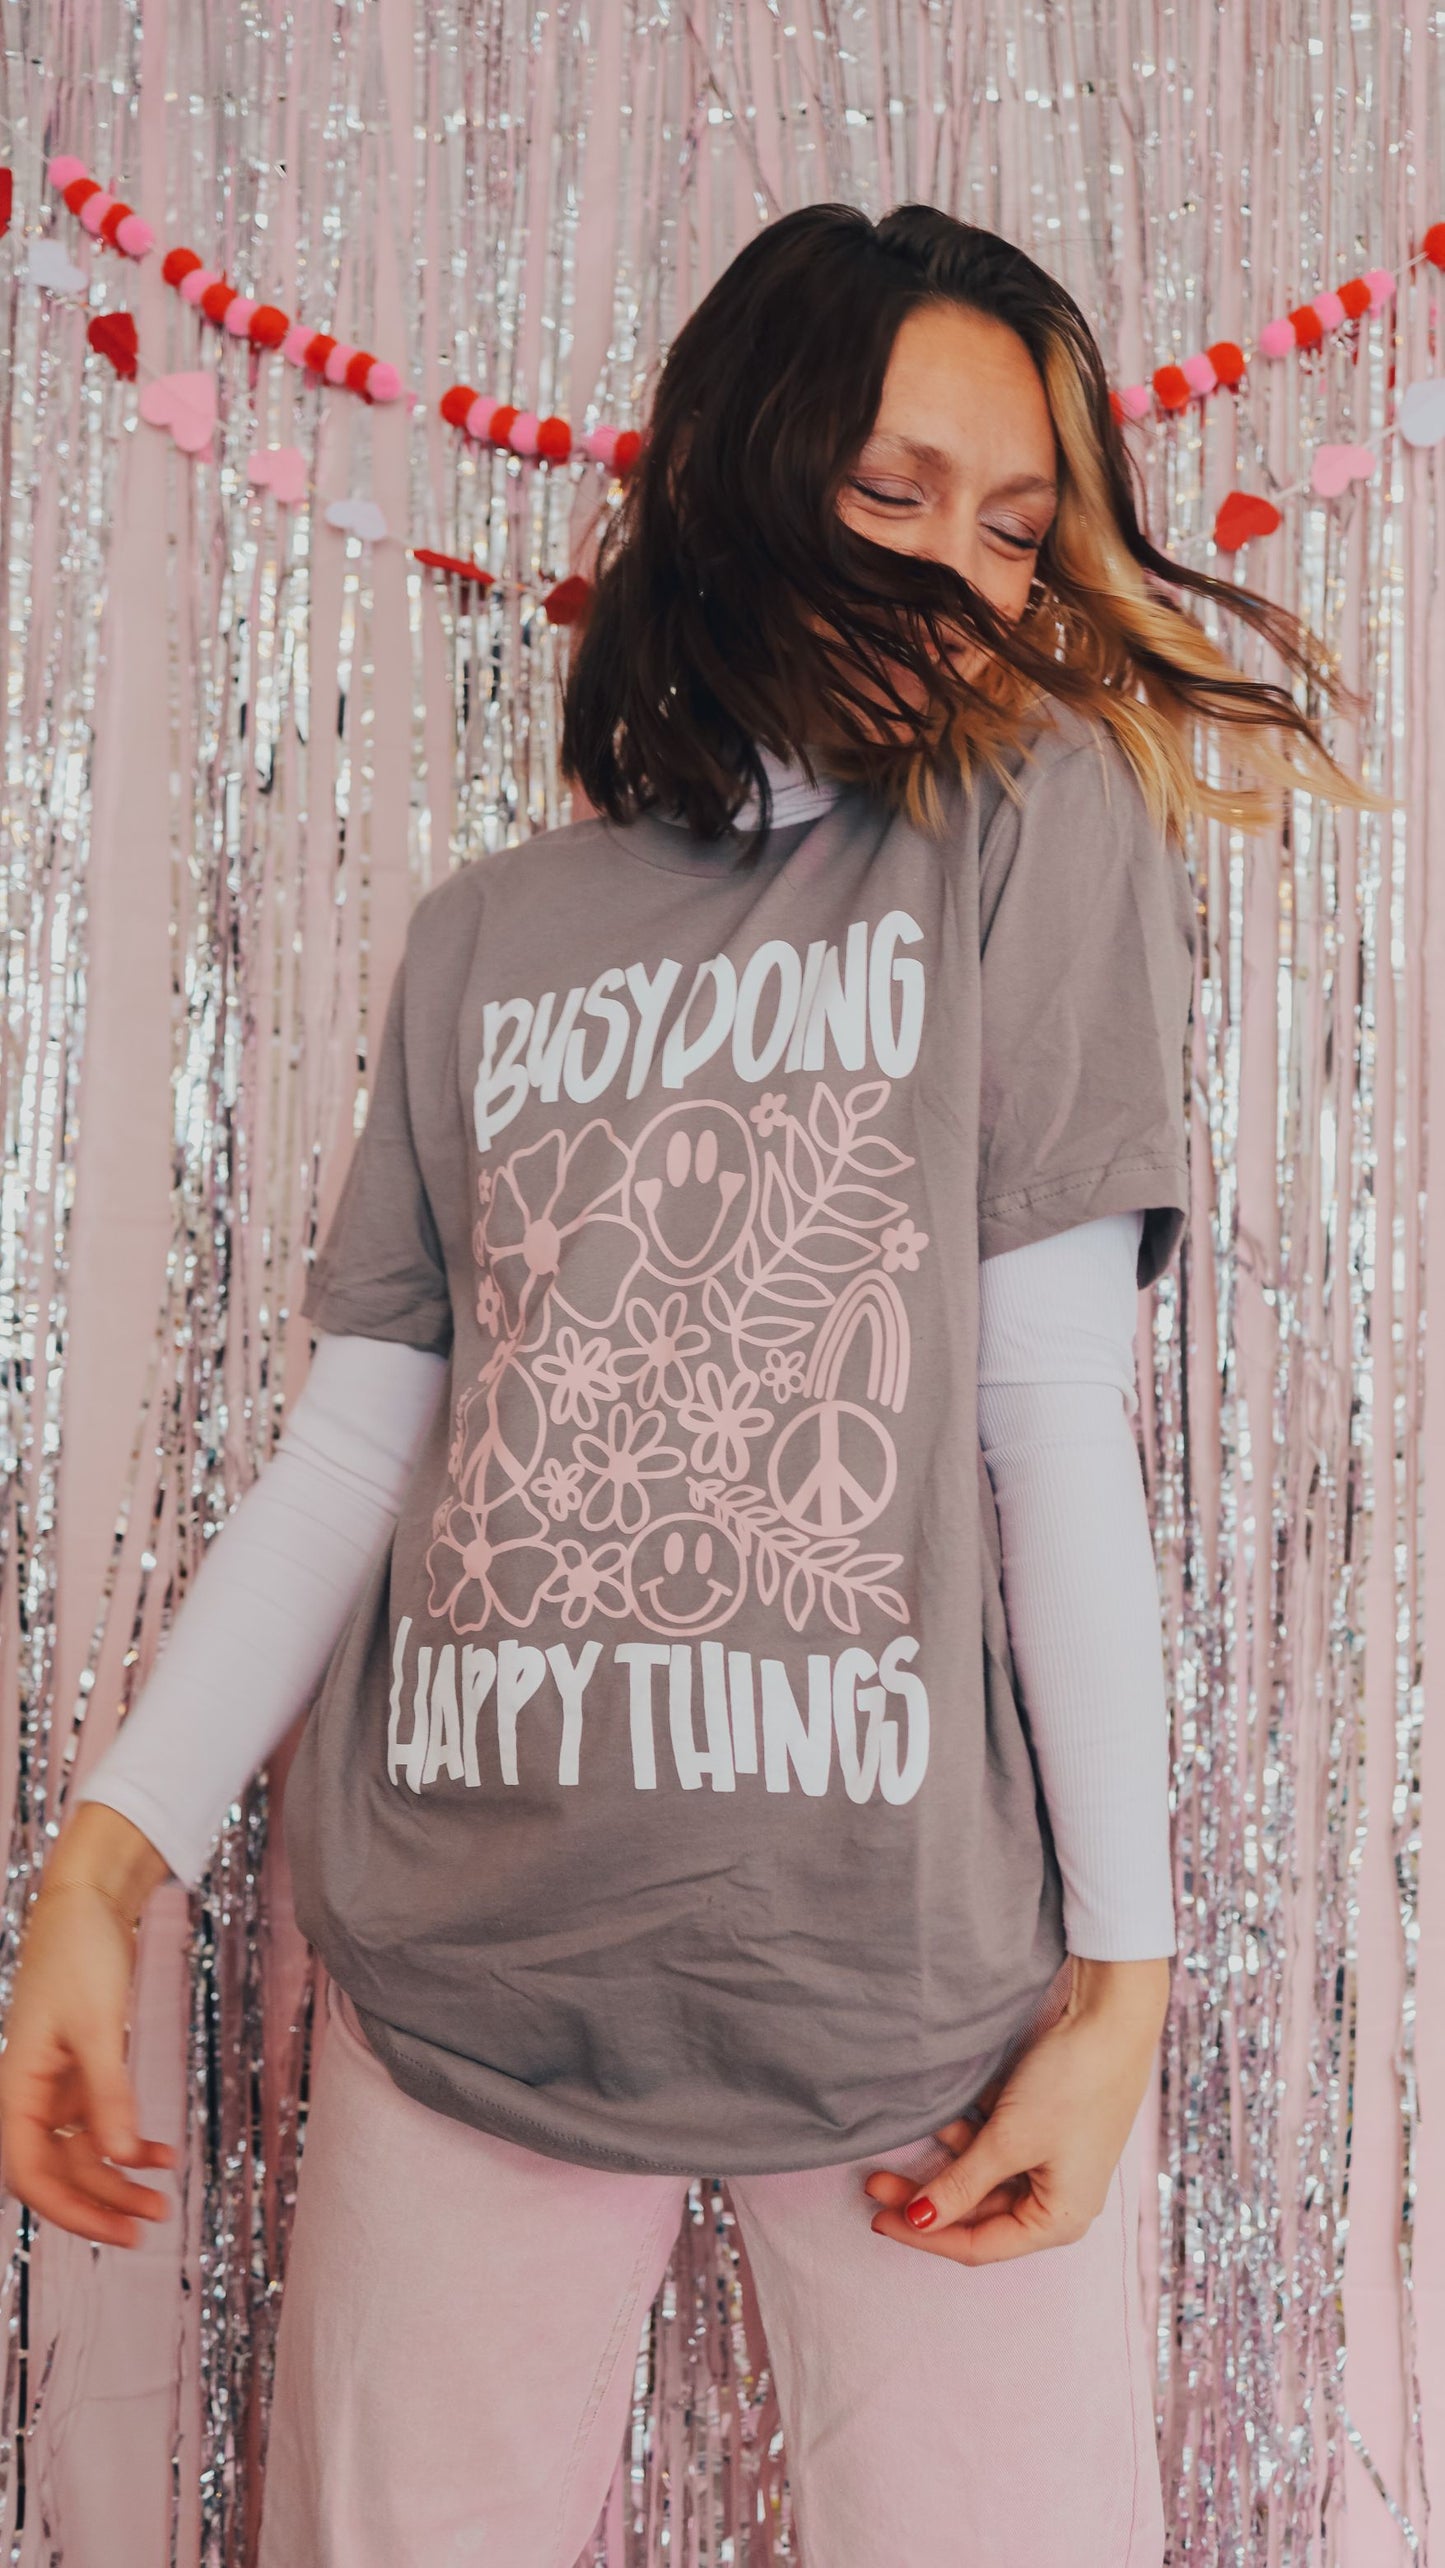 Busy Doing Happy Things Tee